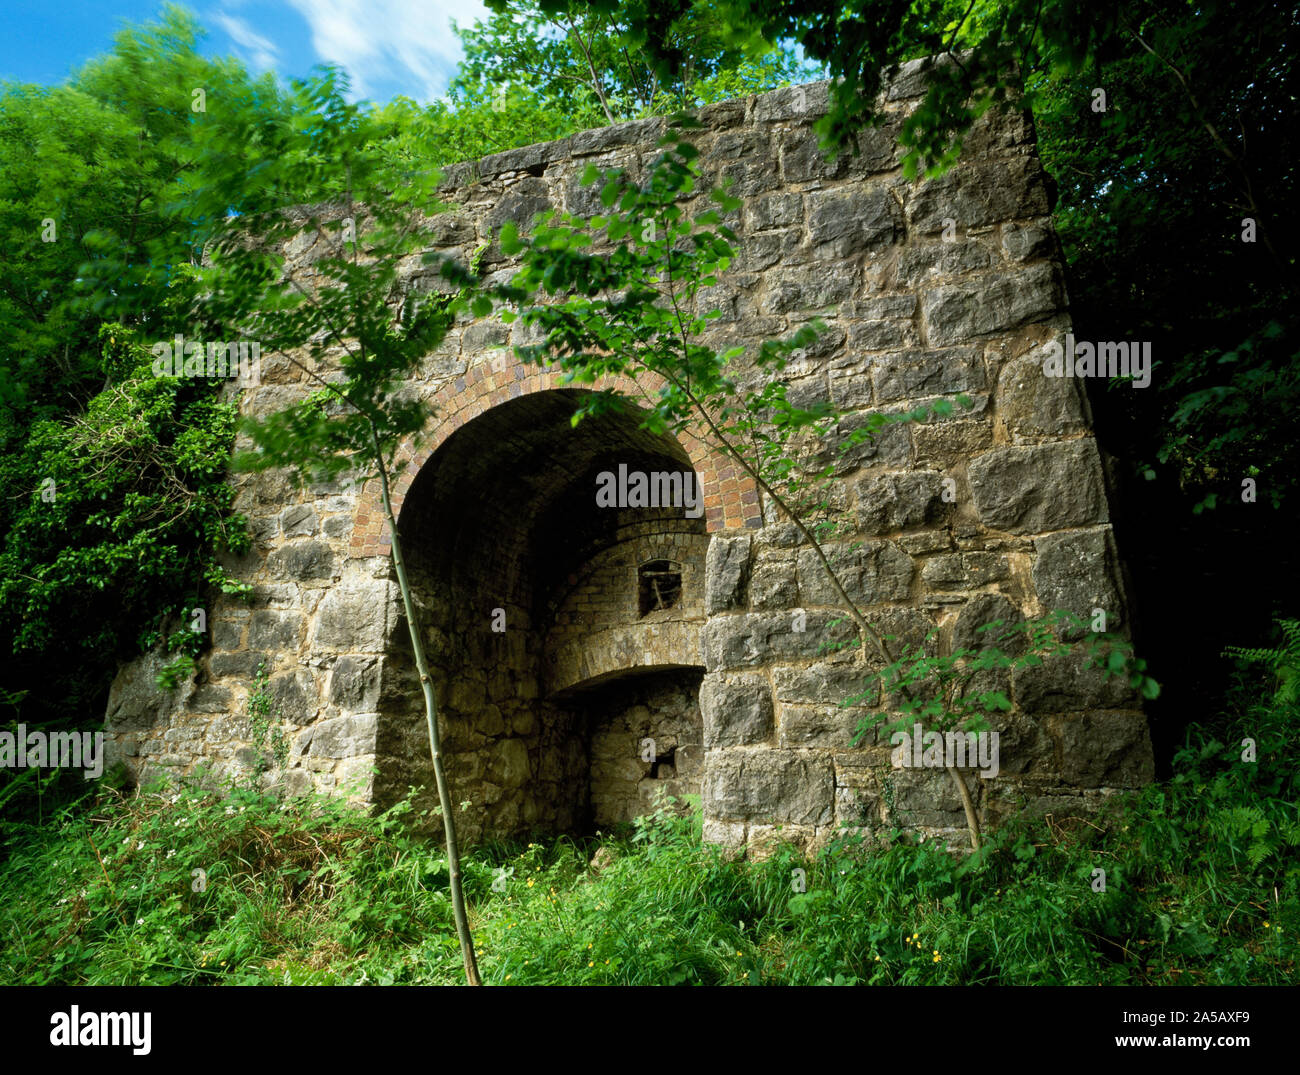 Henblas Hall Limekiln, Graig Nature Reserve, Tremeirchion, Denbighshire, North Wales. Front face with arched working recess. Stock Photo